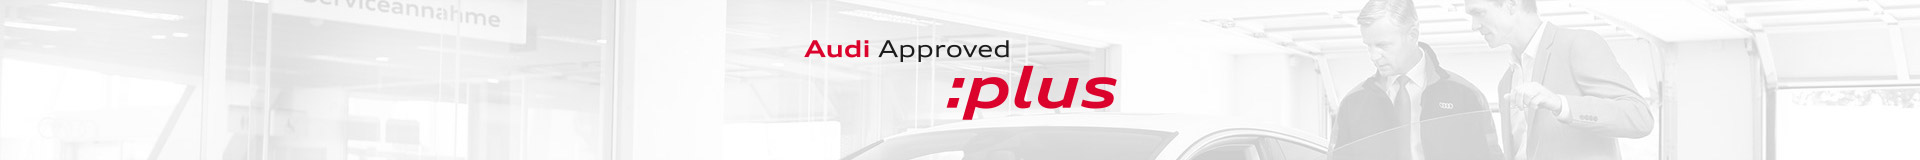 approved plus audi